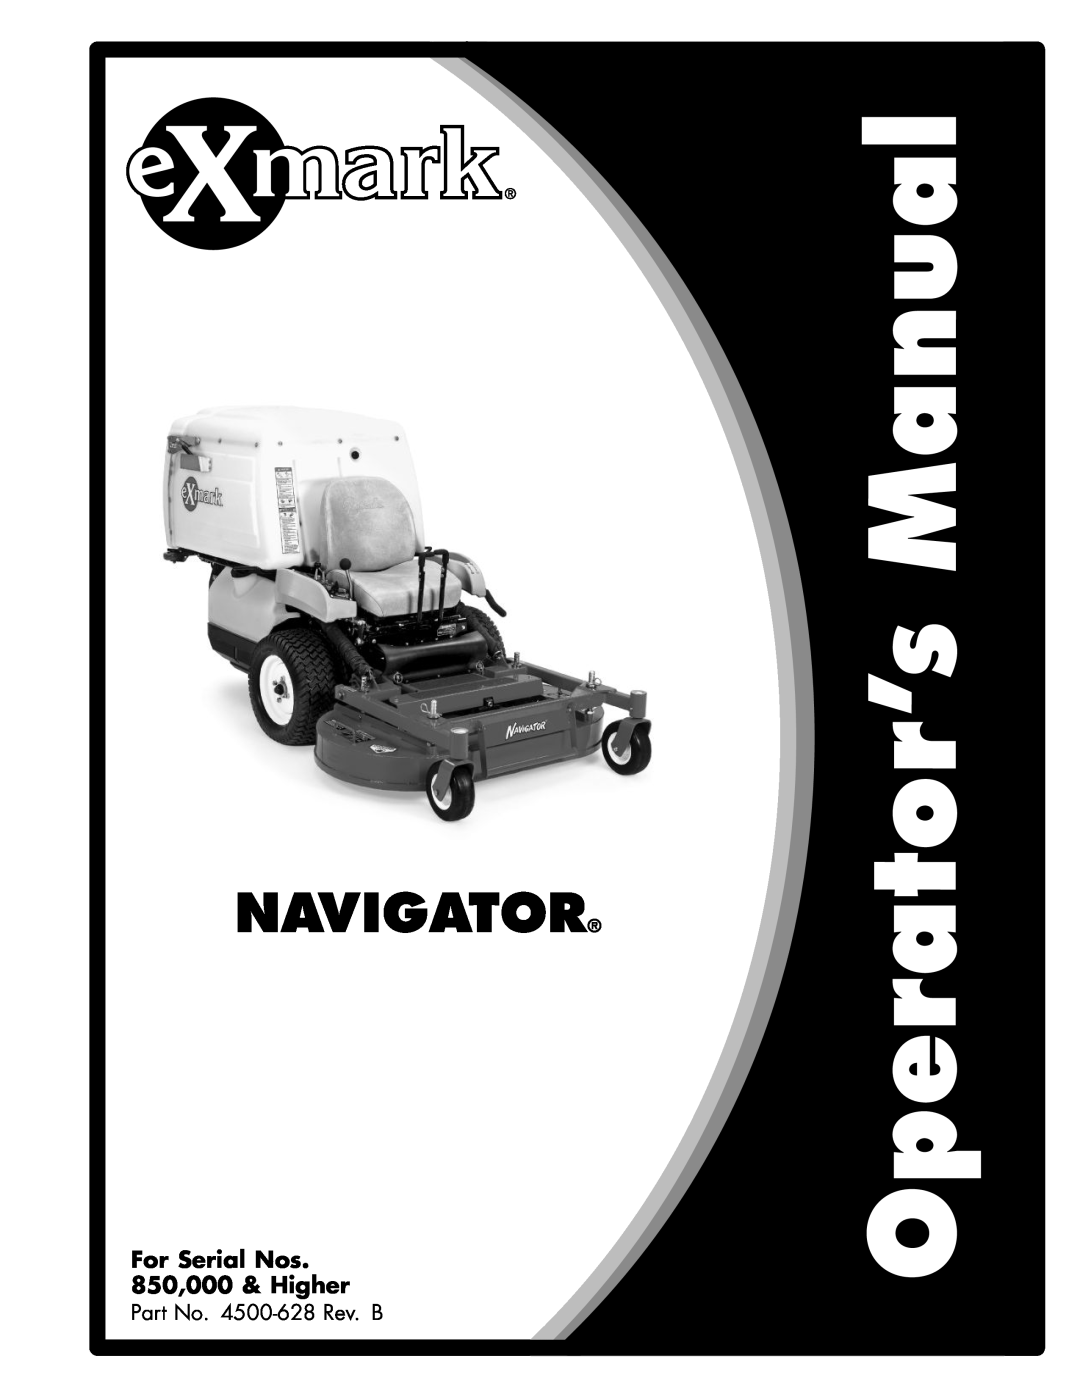 Exmark 000 & higher manual Turf Tracer S-Serieslp, For Serial Nos 312,000,000 & Higher, Part No. 4501-049Rev. A 